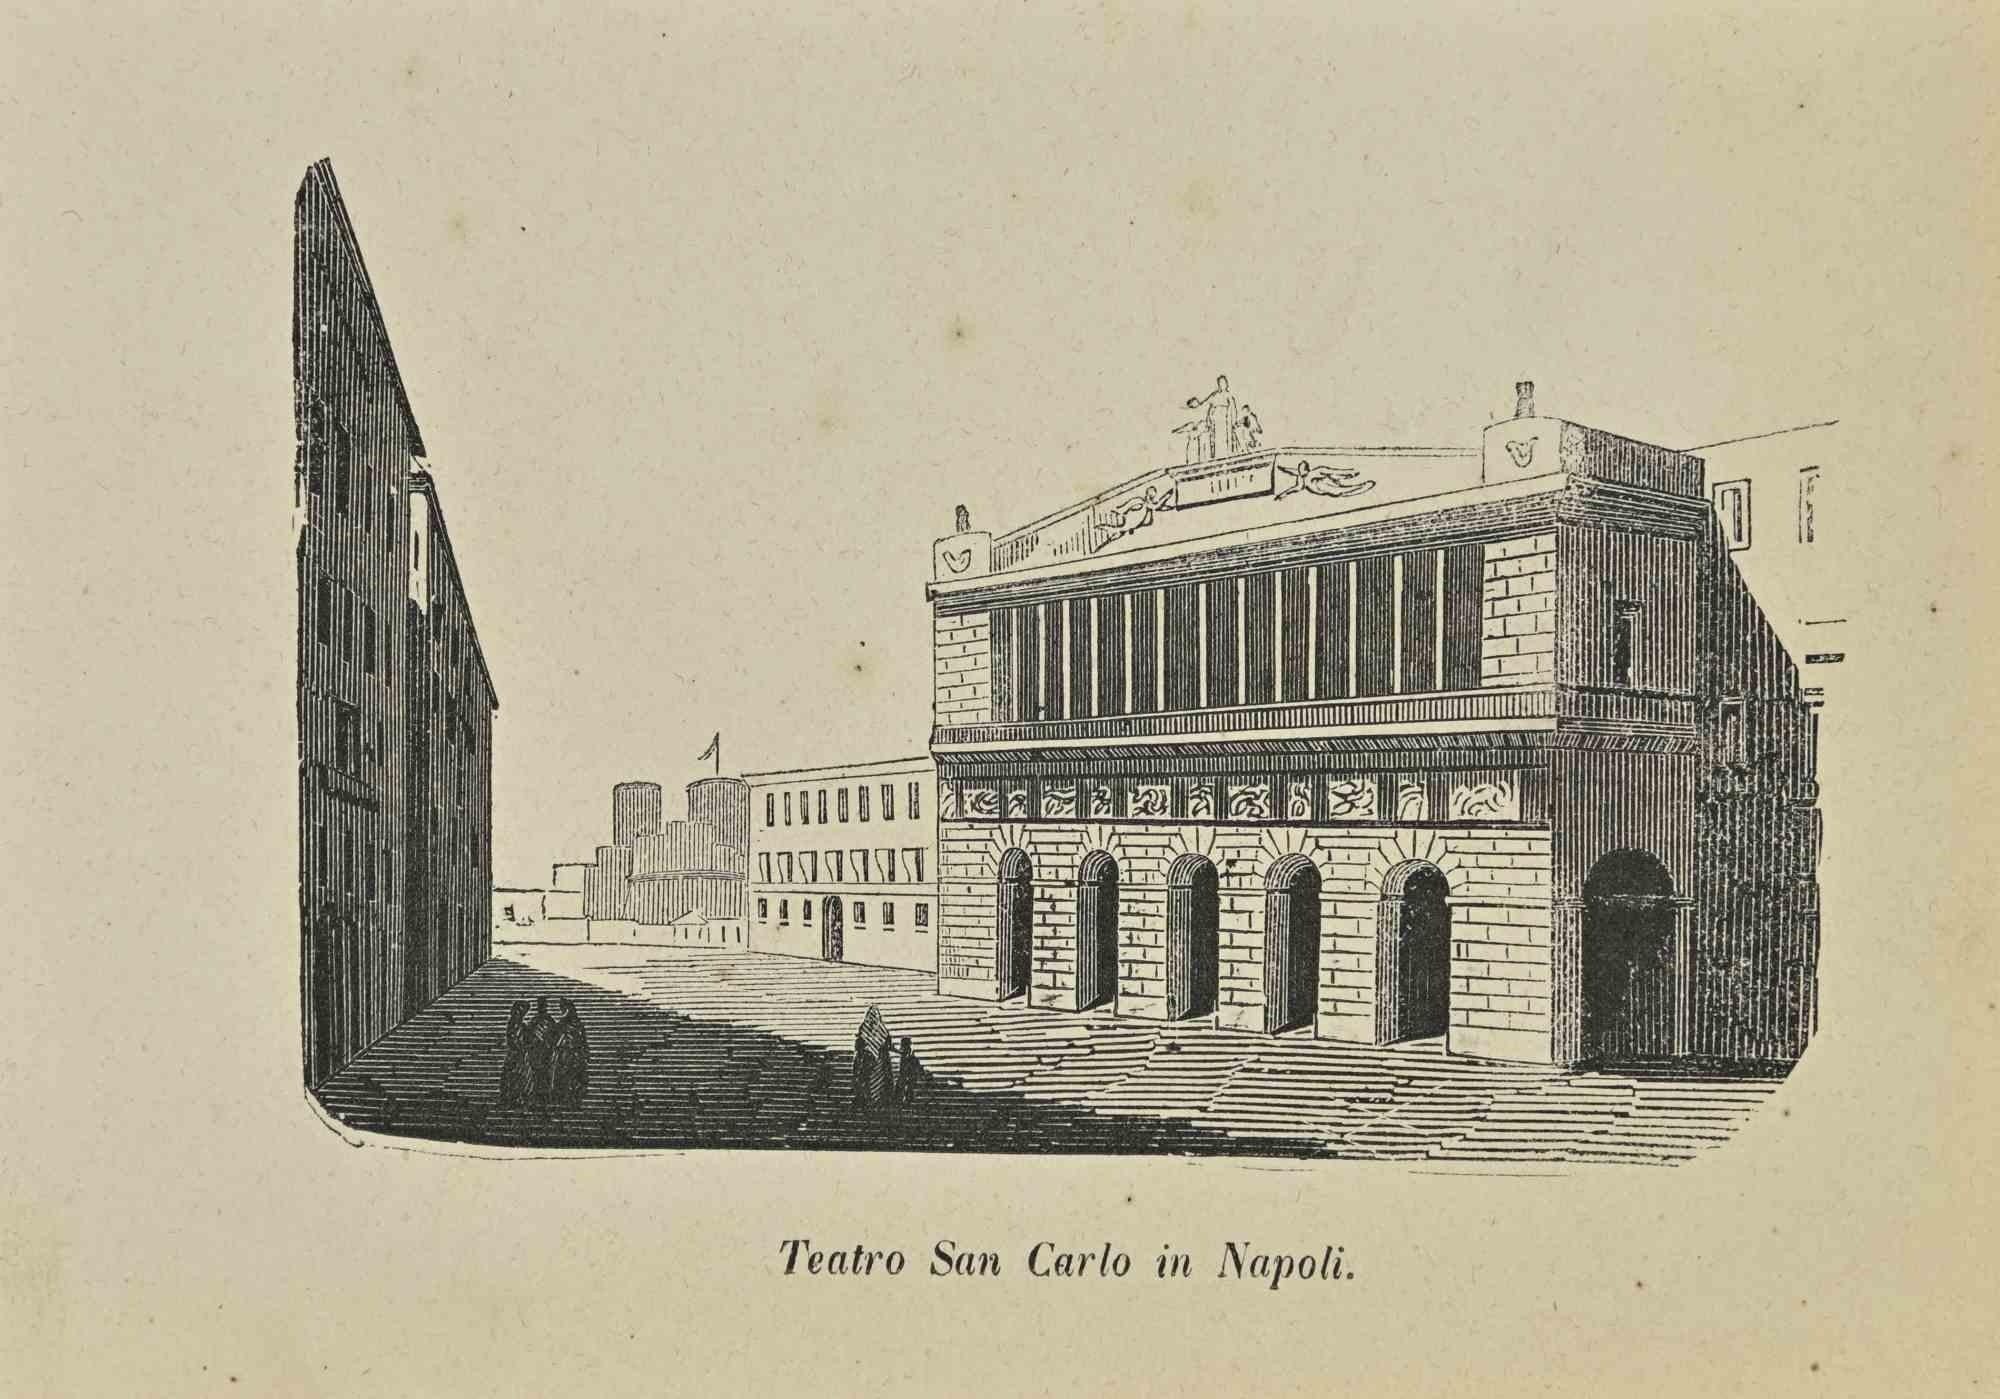 Various Artists Figurative Print - Uses and Customs - Saint Carlo Theatre in Naples - Lithograph - 1862